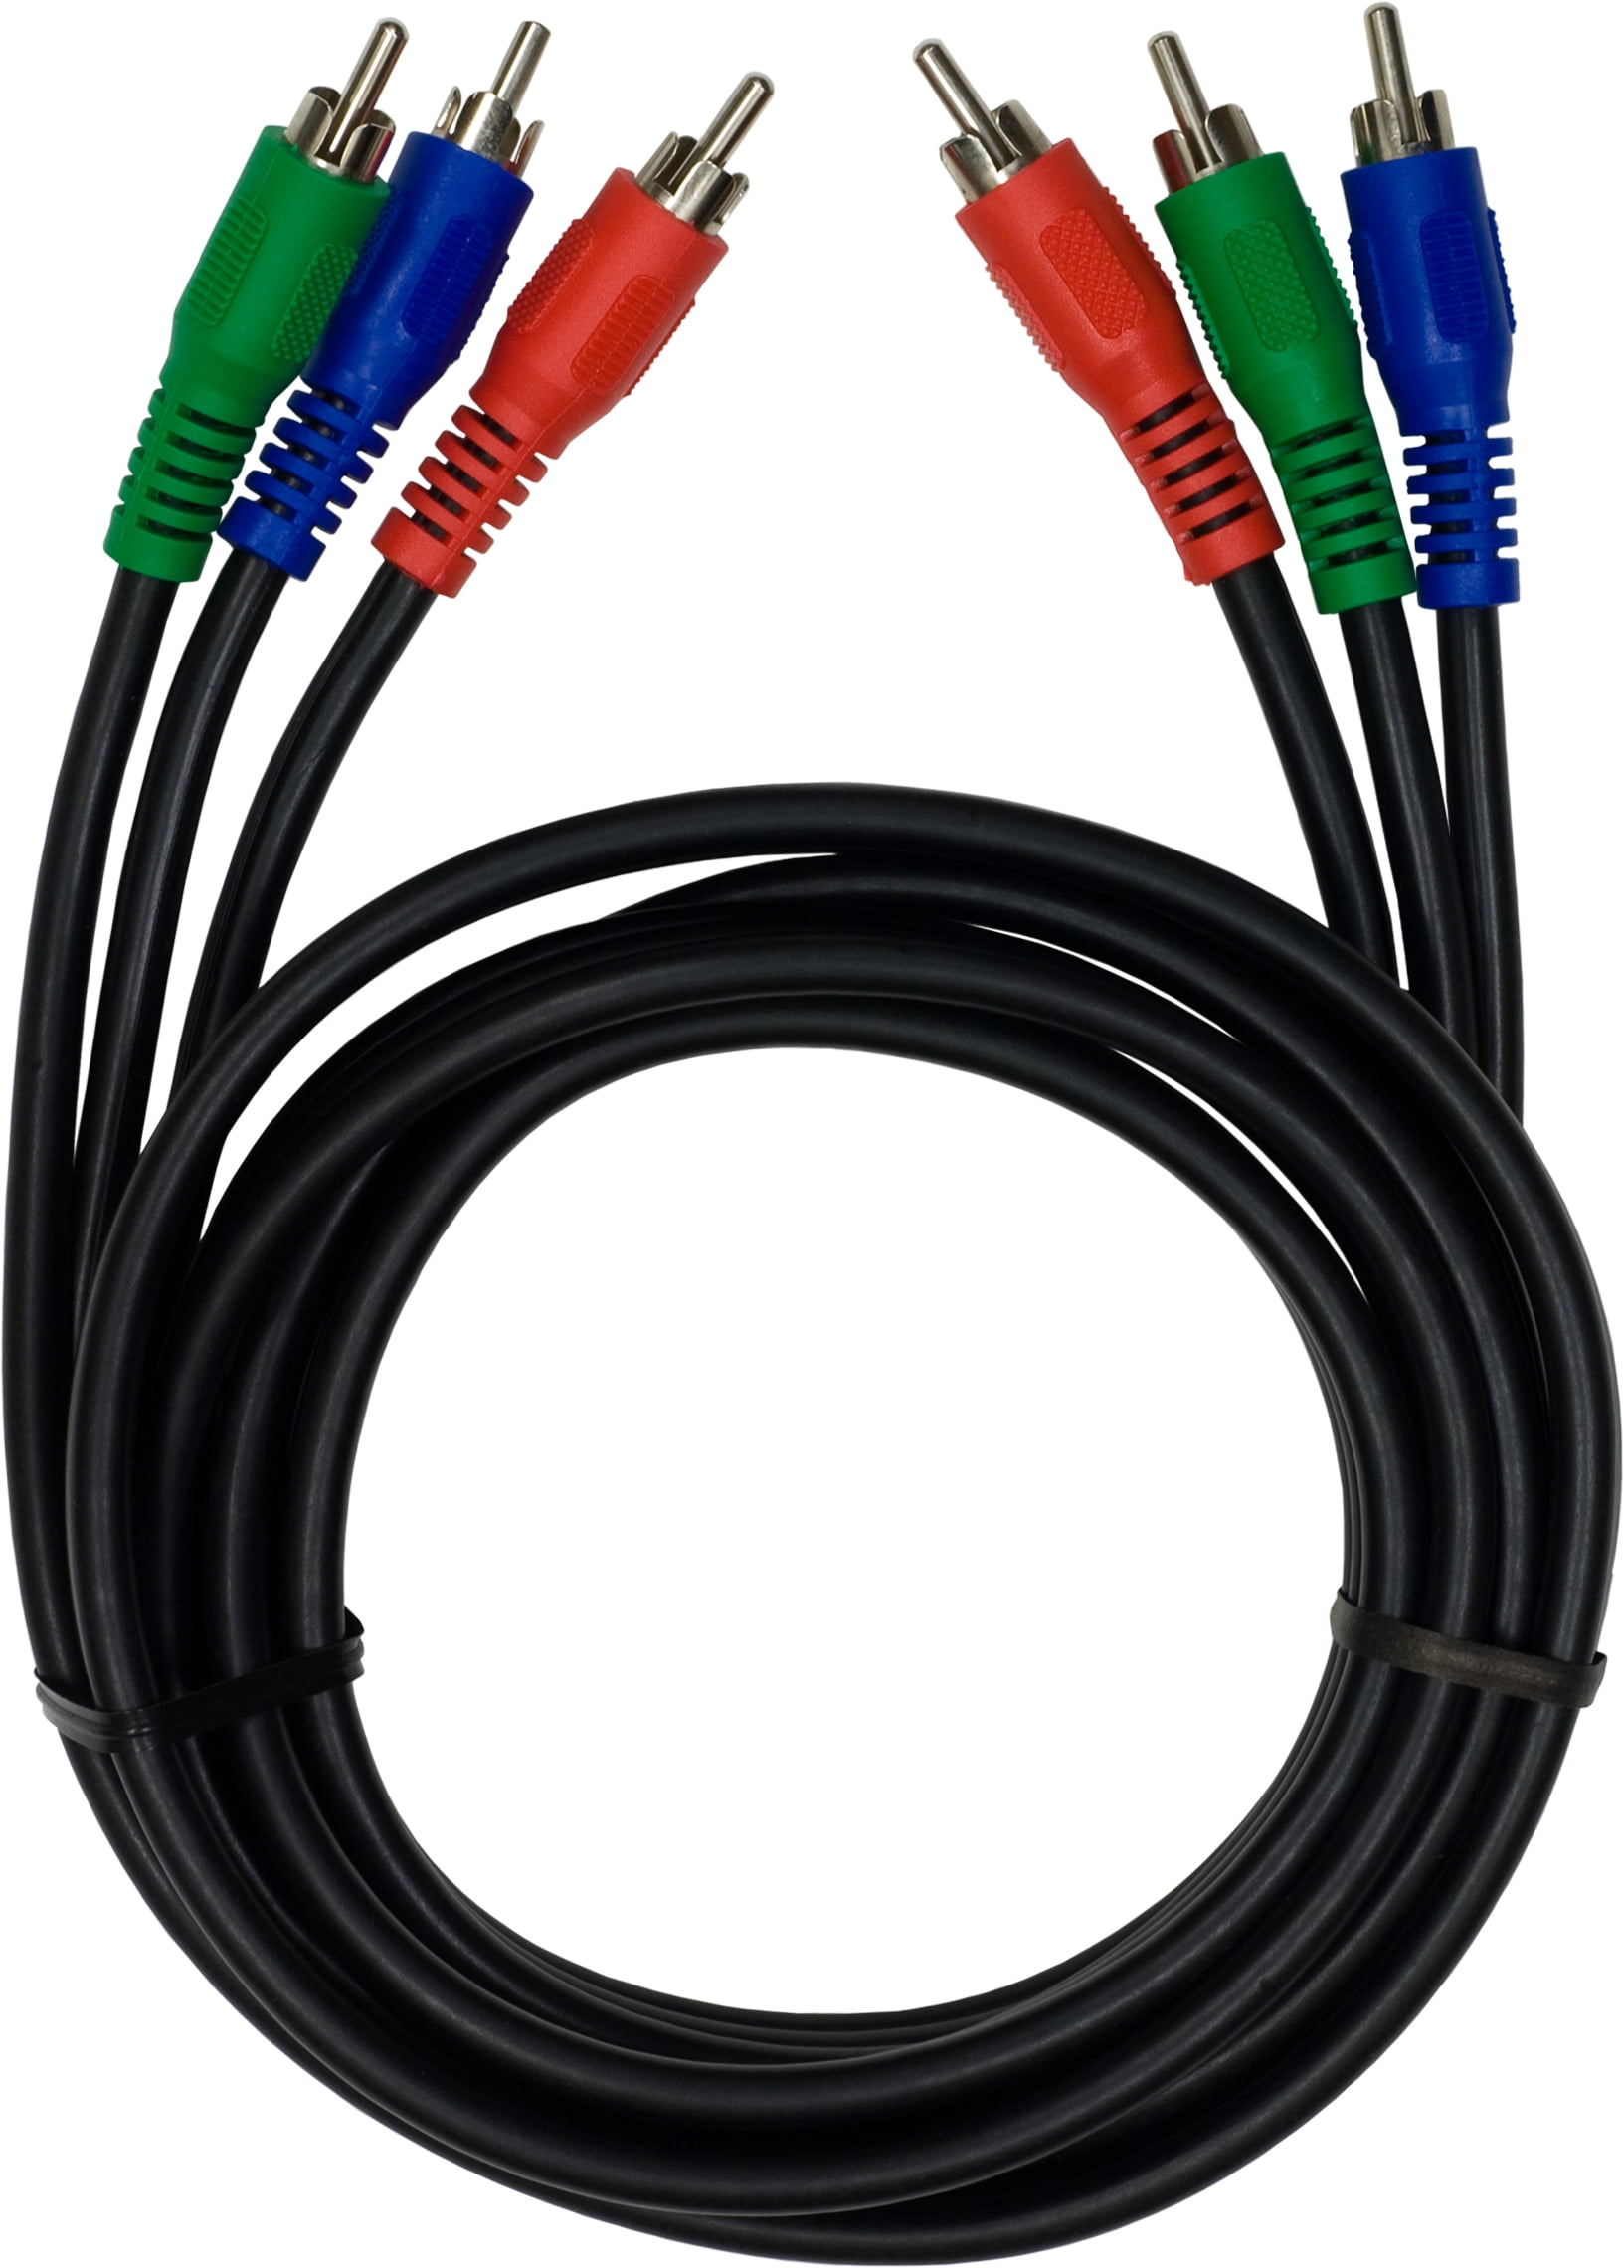 GE 6ft. Component Video/Audio Cable with RCA-Type Connectors, Black